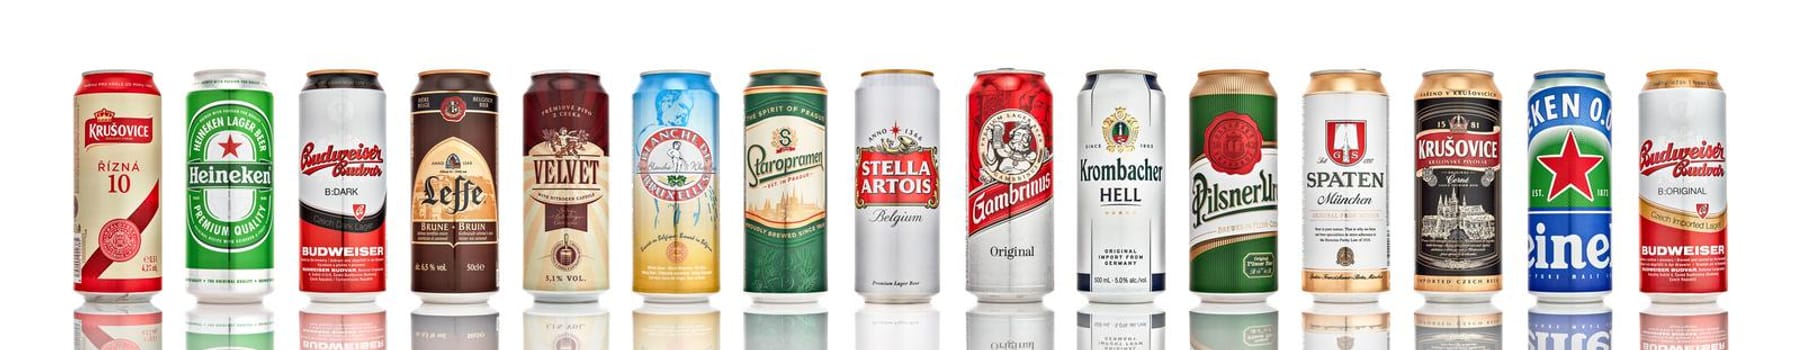 Set of popular european beer in cans on white background. Beer in cans. 21.06.2019, Rostov-on-Don, Russia.